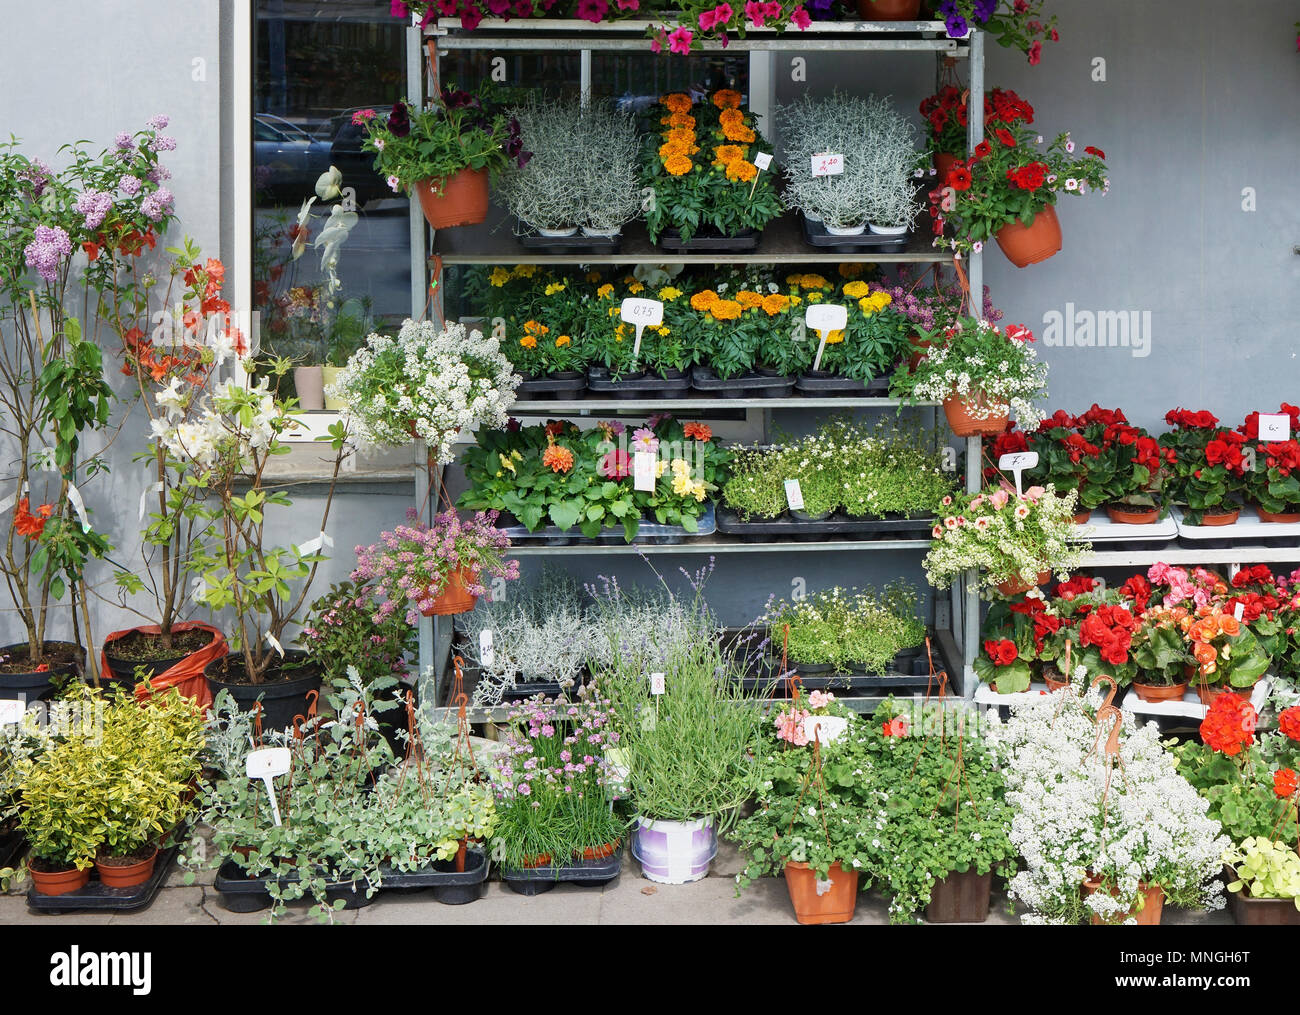 A small street store market sells fresh live spring flowers in pots. May outdoor front view urban shot Stock Photo